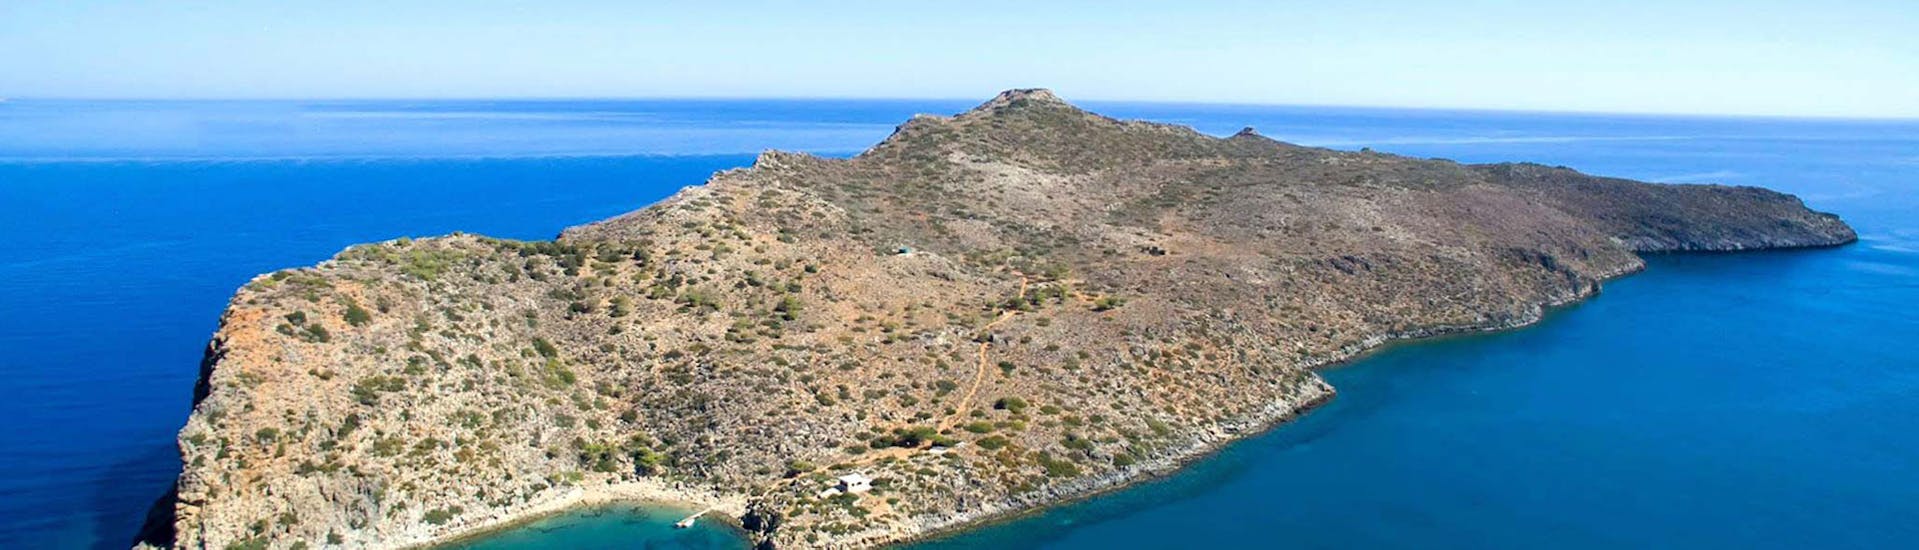 One of the islands where you will go during the Boat Trip from Chania to Agioi Theodoroi & Lazaretta with Manos Cruises Chania.